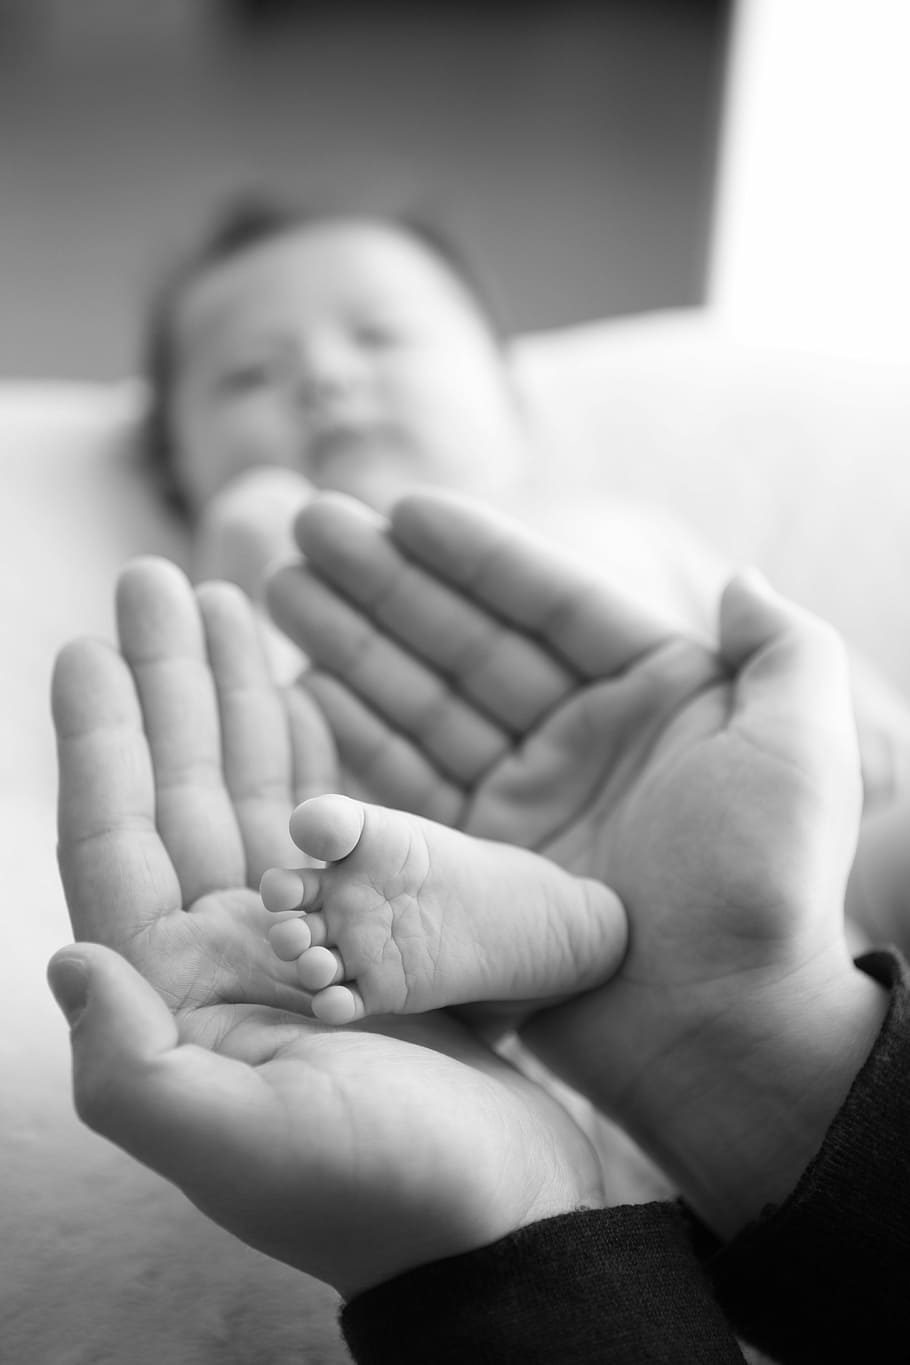 person, holding, baby, foot, hand, dad, chiu, one hundred days, stone, finger